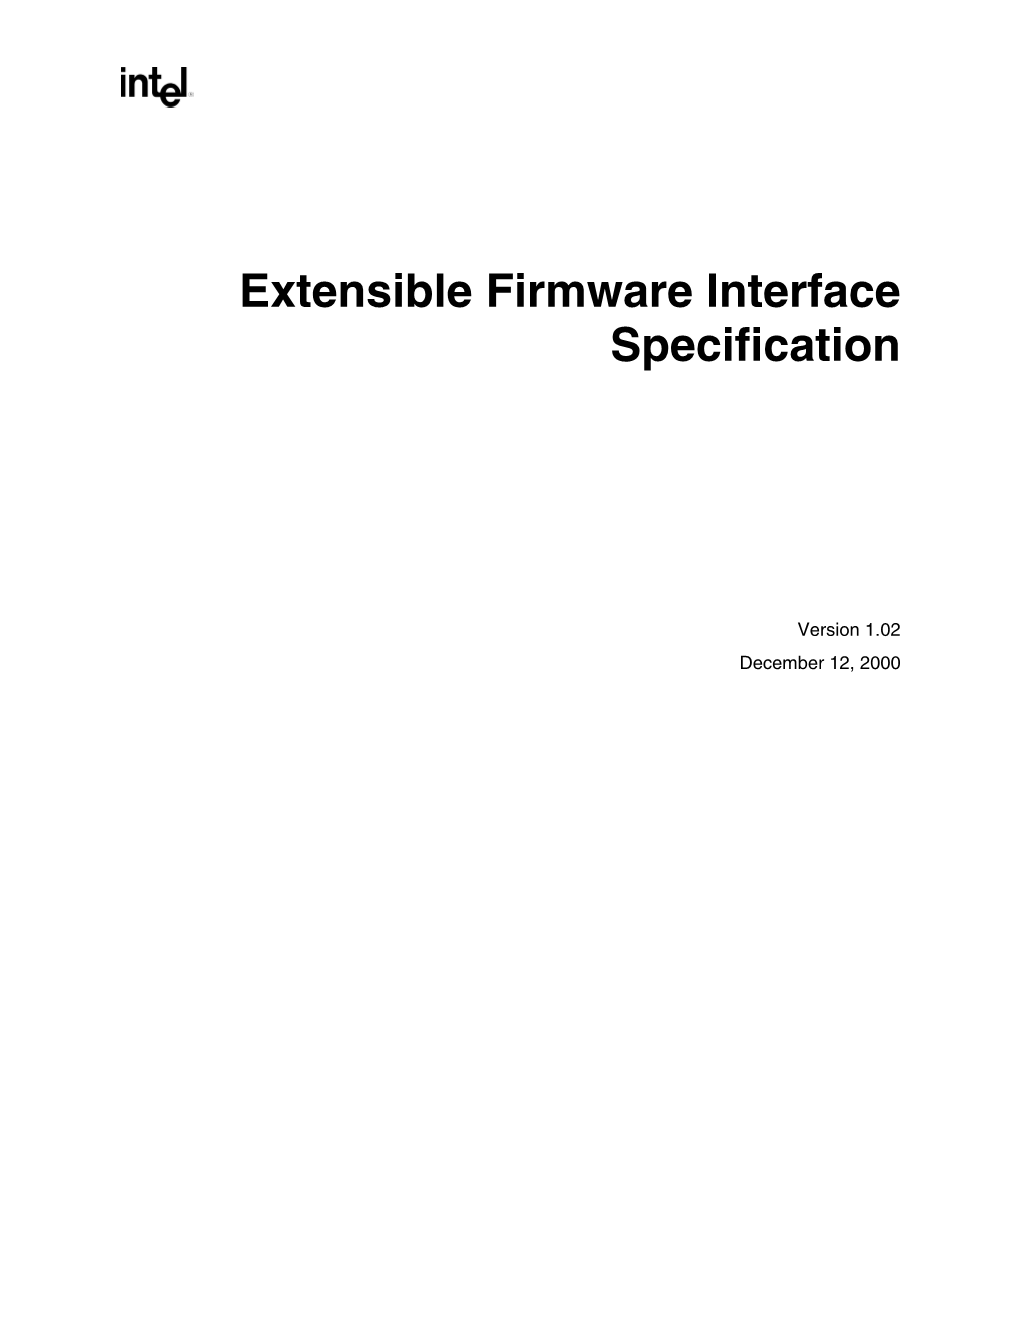 Extensible Firmware Interface Specification